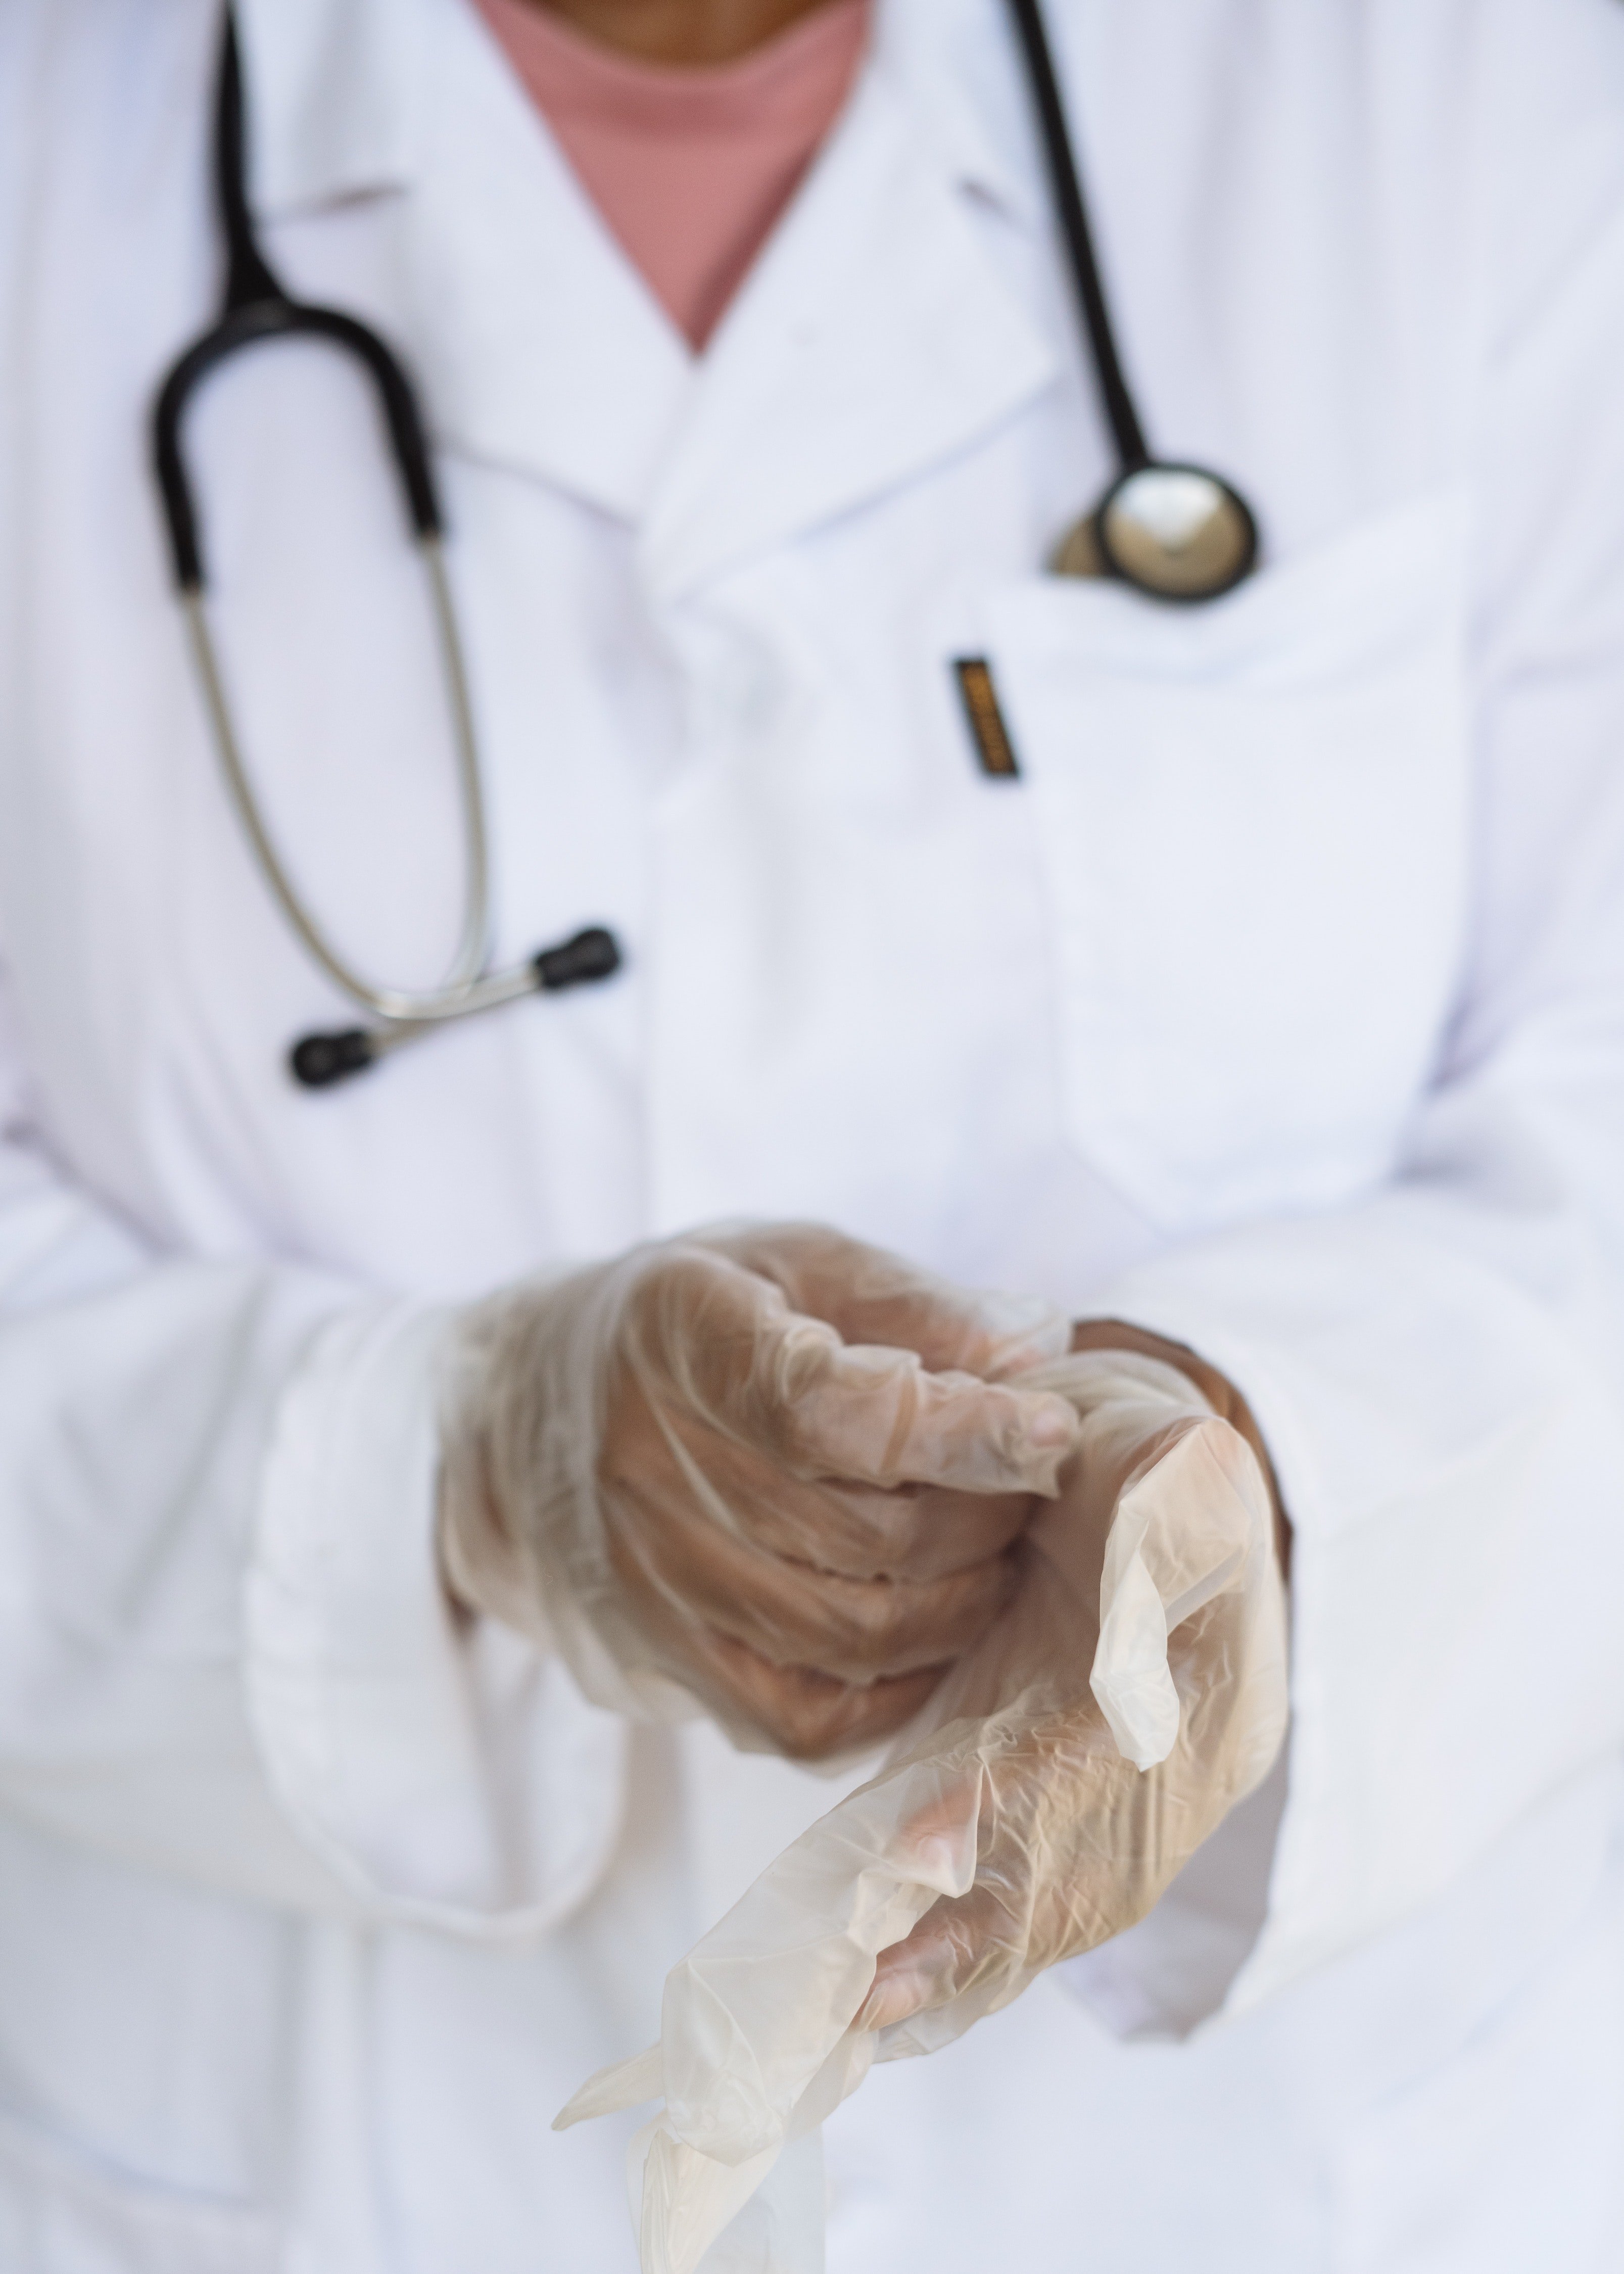 A doctor putting on gloves. | Source: Pexels